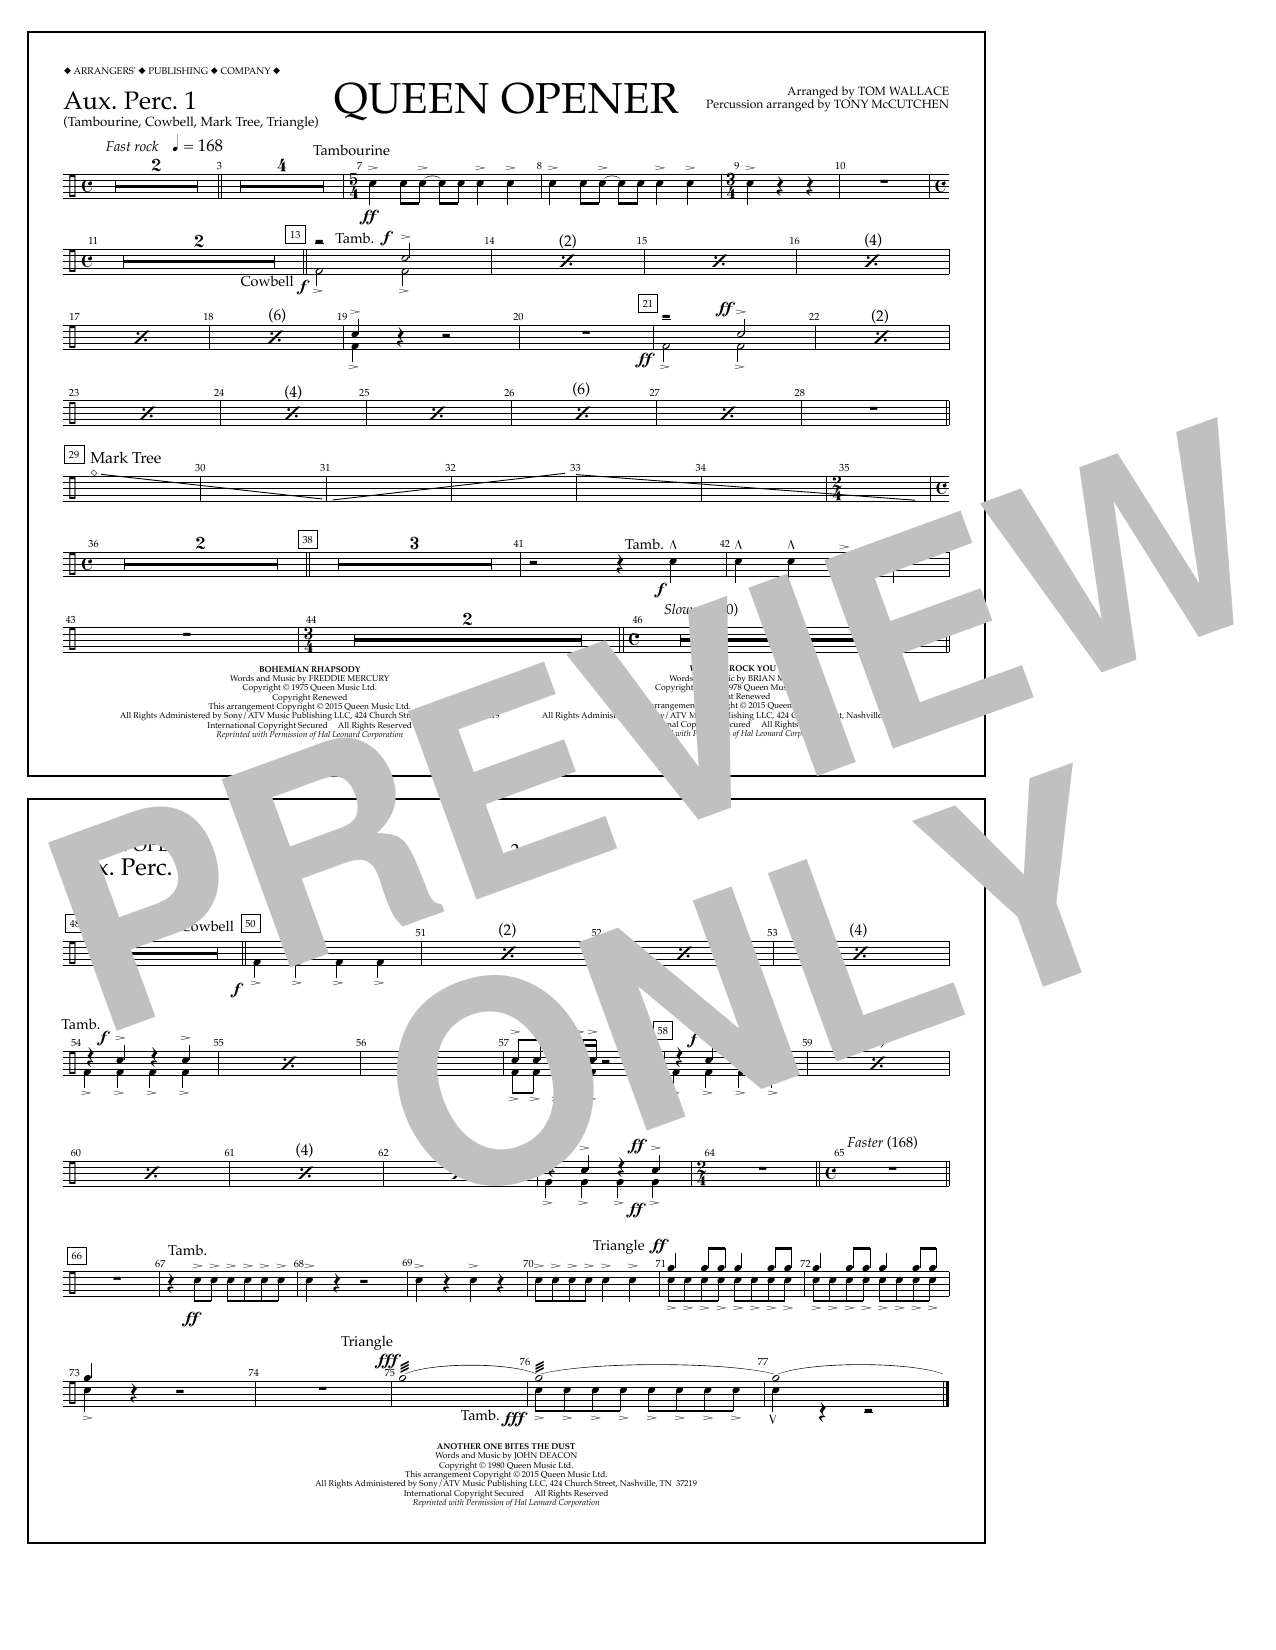 Download Tom Wallace Queen Opener - Aux. Perc. 1 Sheet Music